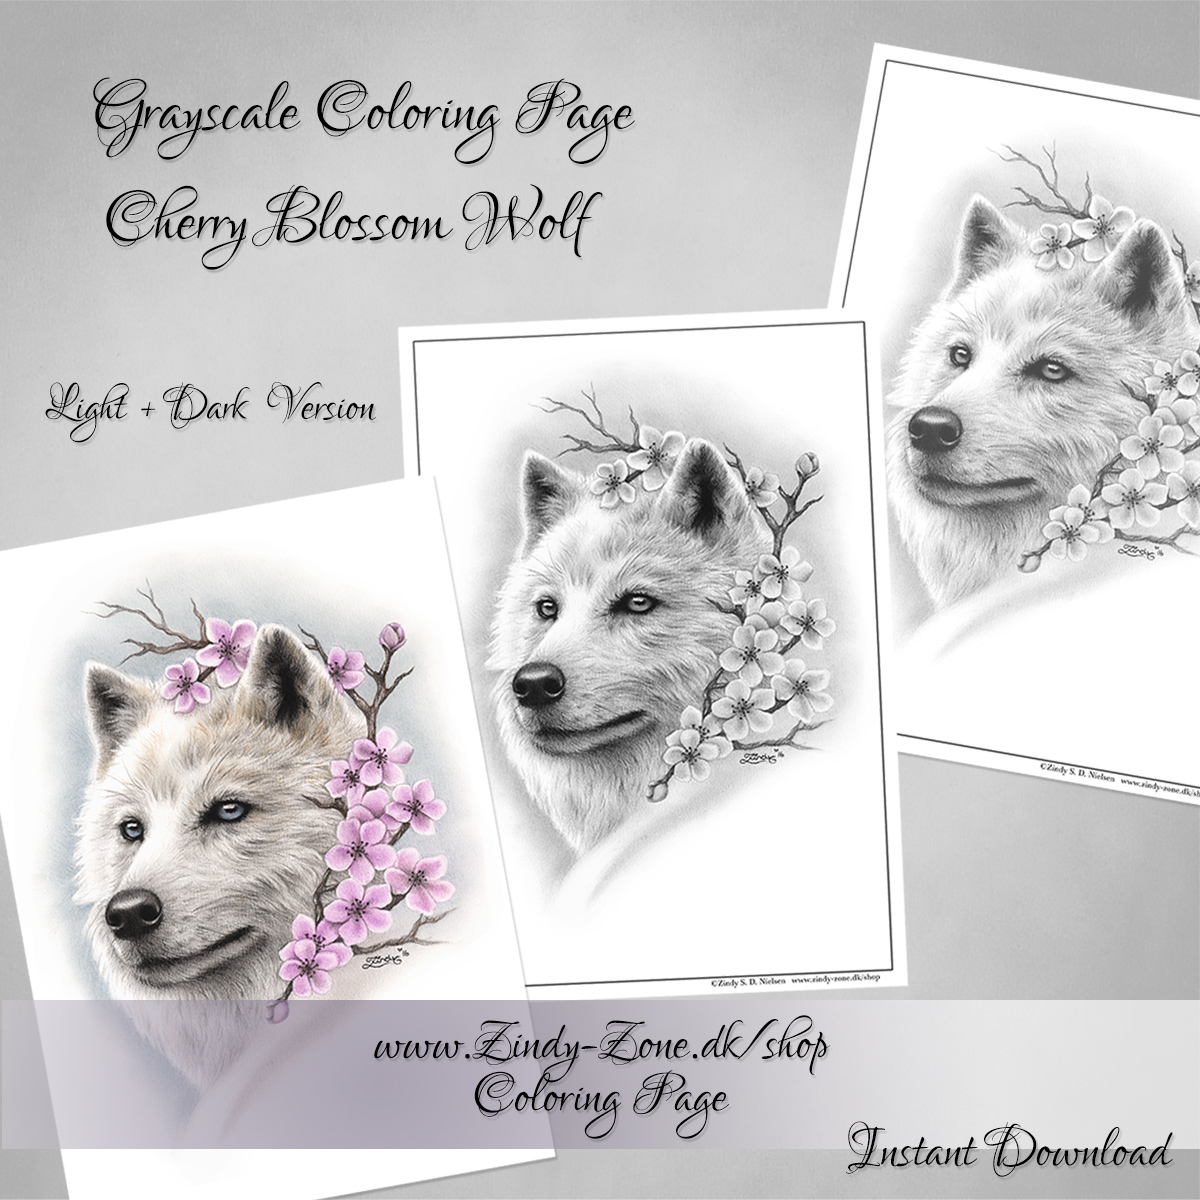 Cherry Blossom White Wolf Coloring Page - Grayscale